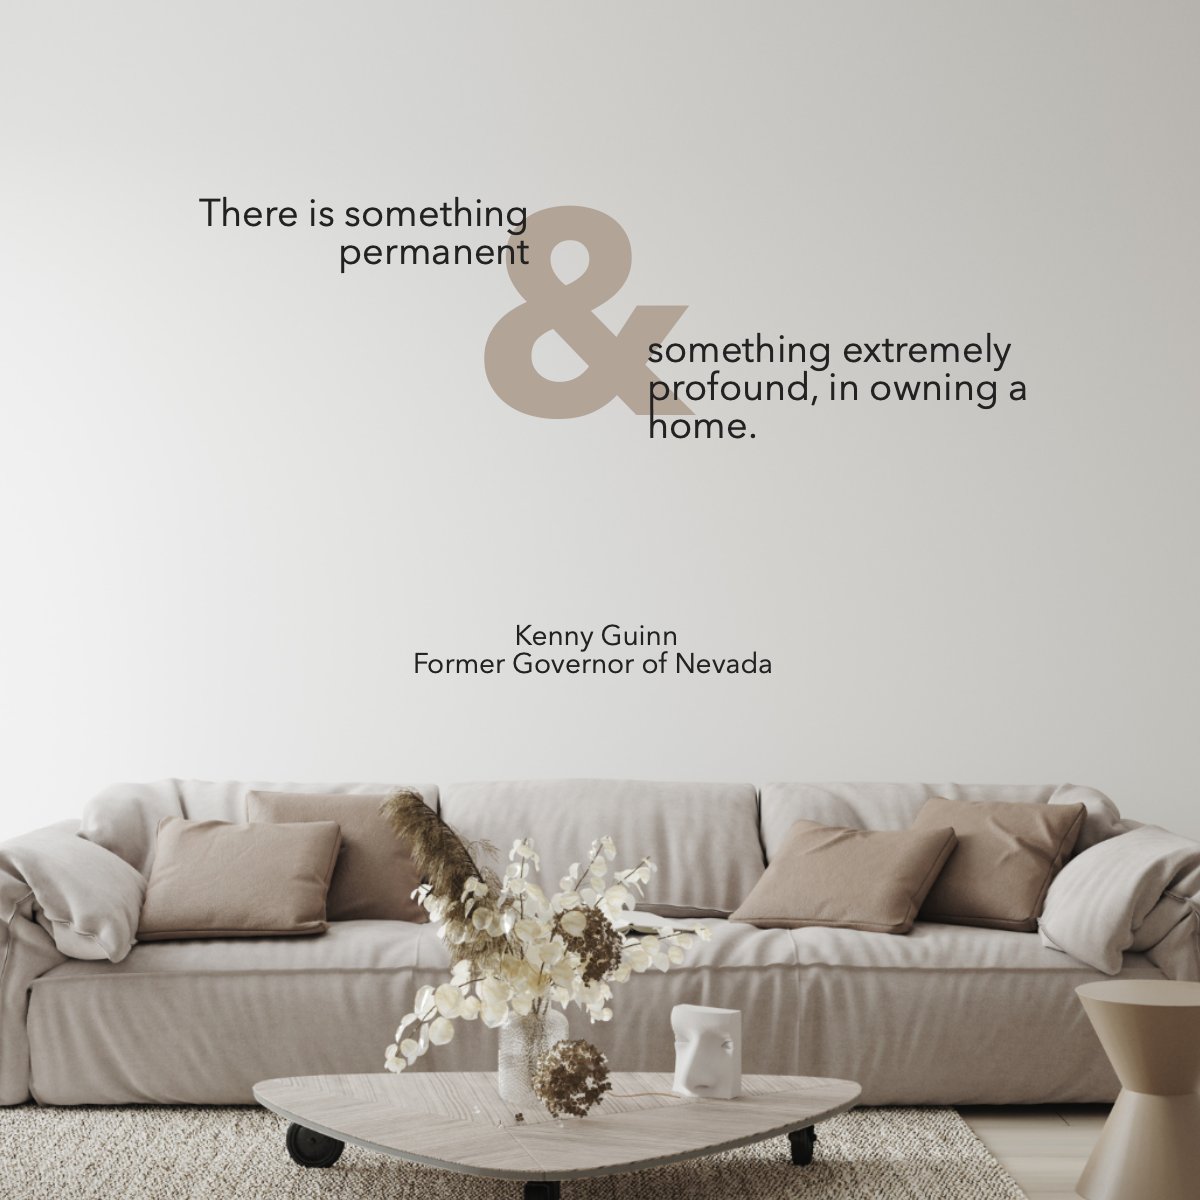 'There is something permanent, and something extremely profound, in owning a home.' — Kenny Guinn 📖 #quoteoftheday #quotestagram #lifequotes #realestate #quotes #realestate